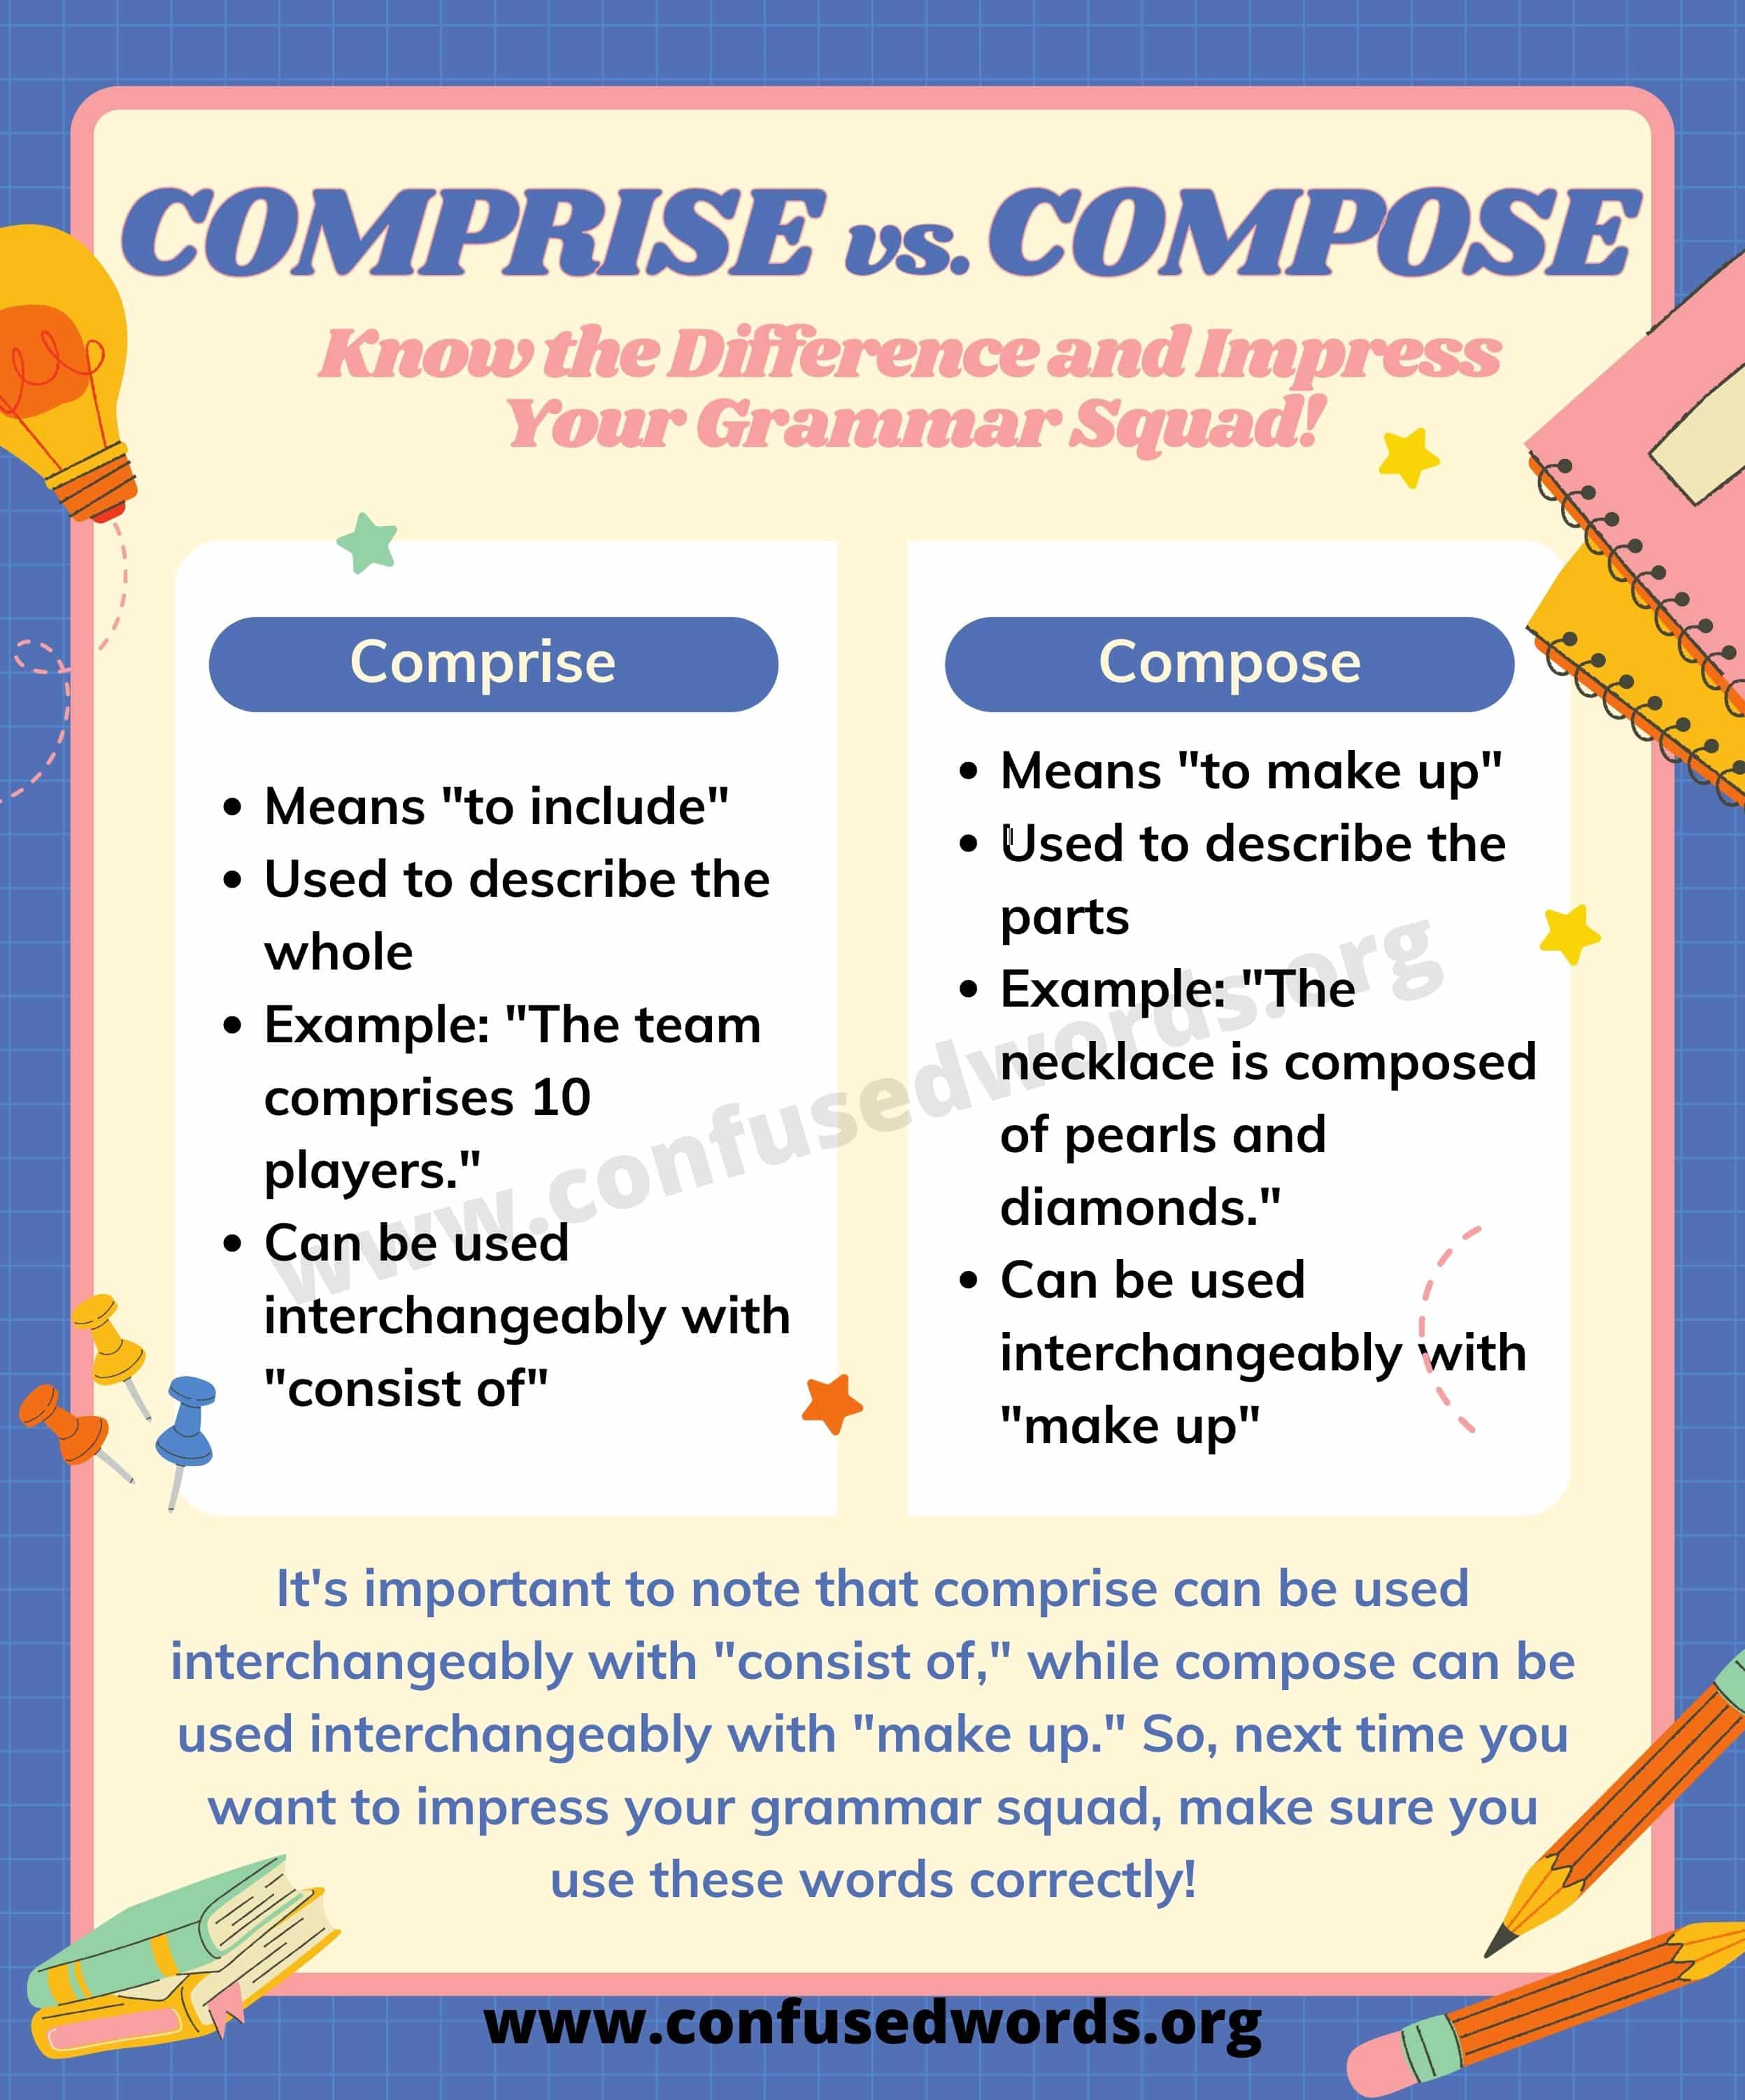 Comprise vs. Compose: Understanding the Key Differences for Better Writing